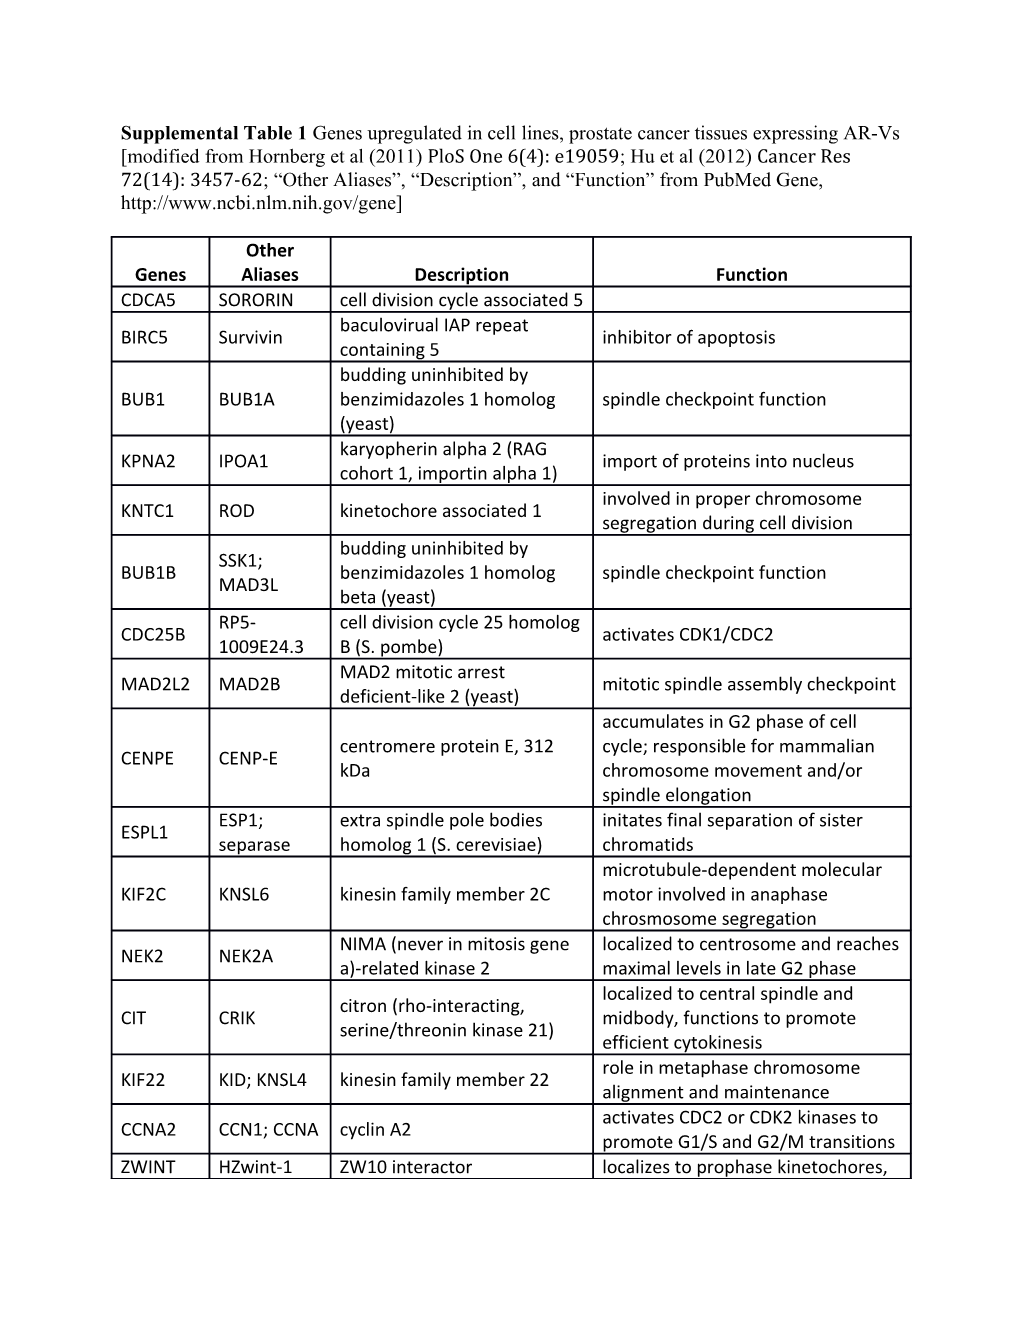 Supplemental Table 1 Genes Upregulated in Cell Lines, Prostate Cancer Tissues Expressing